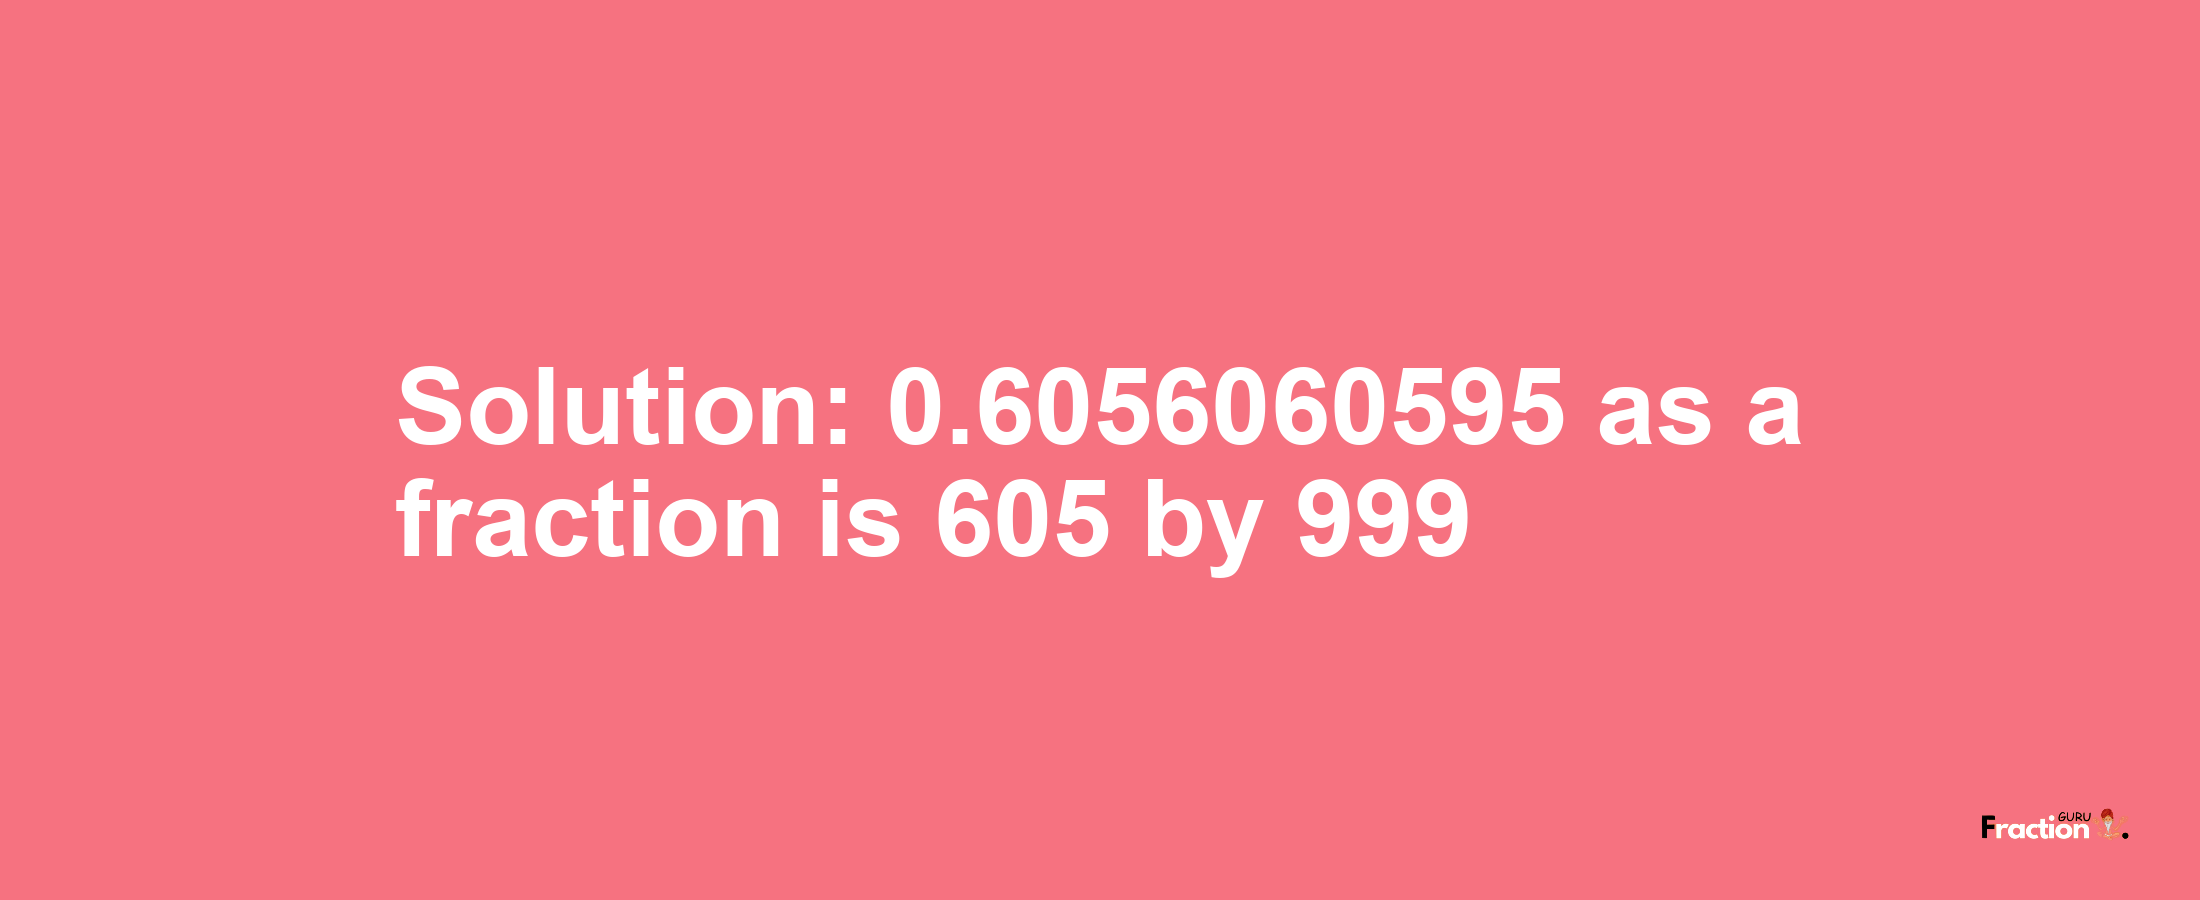 Solution:0.6056060595 as a fraction is 605/999